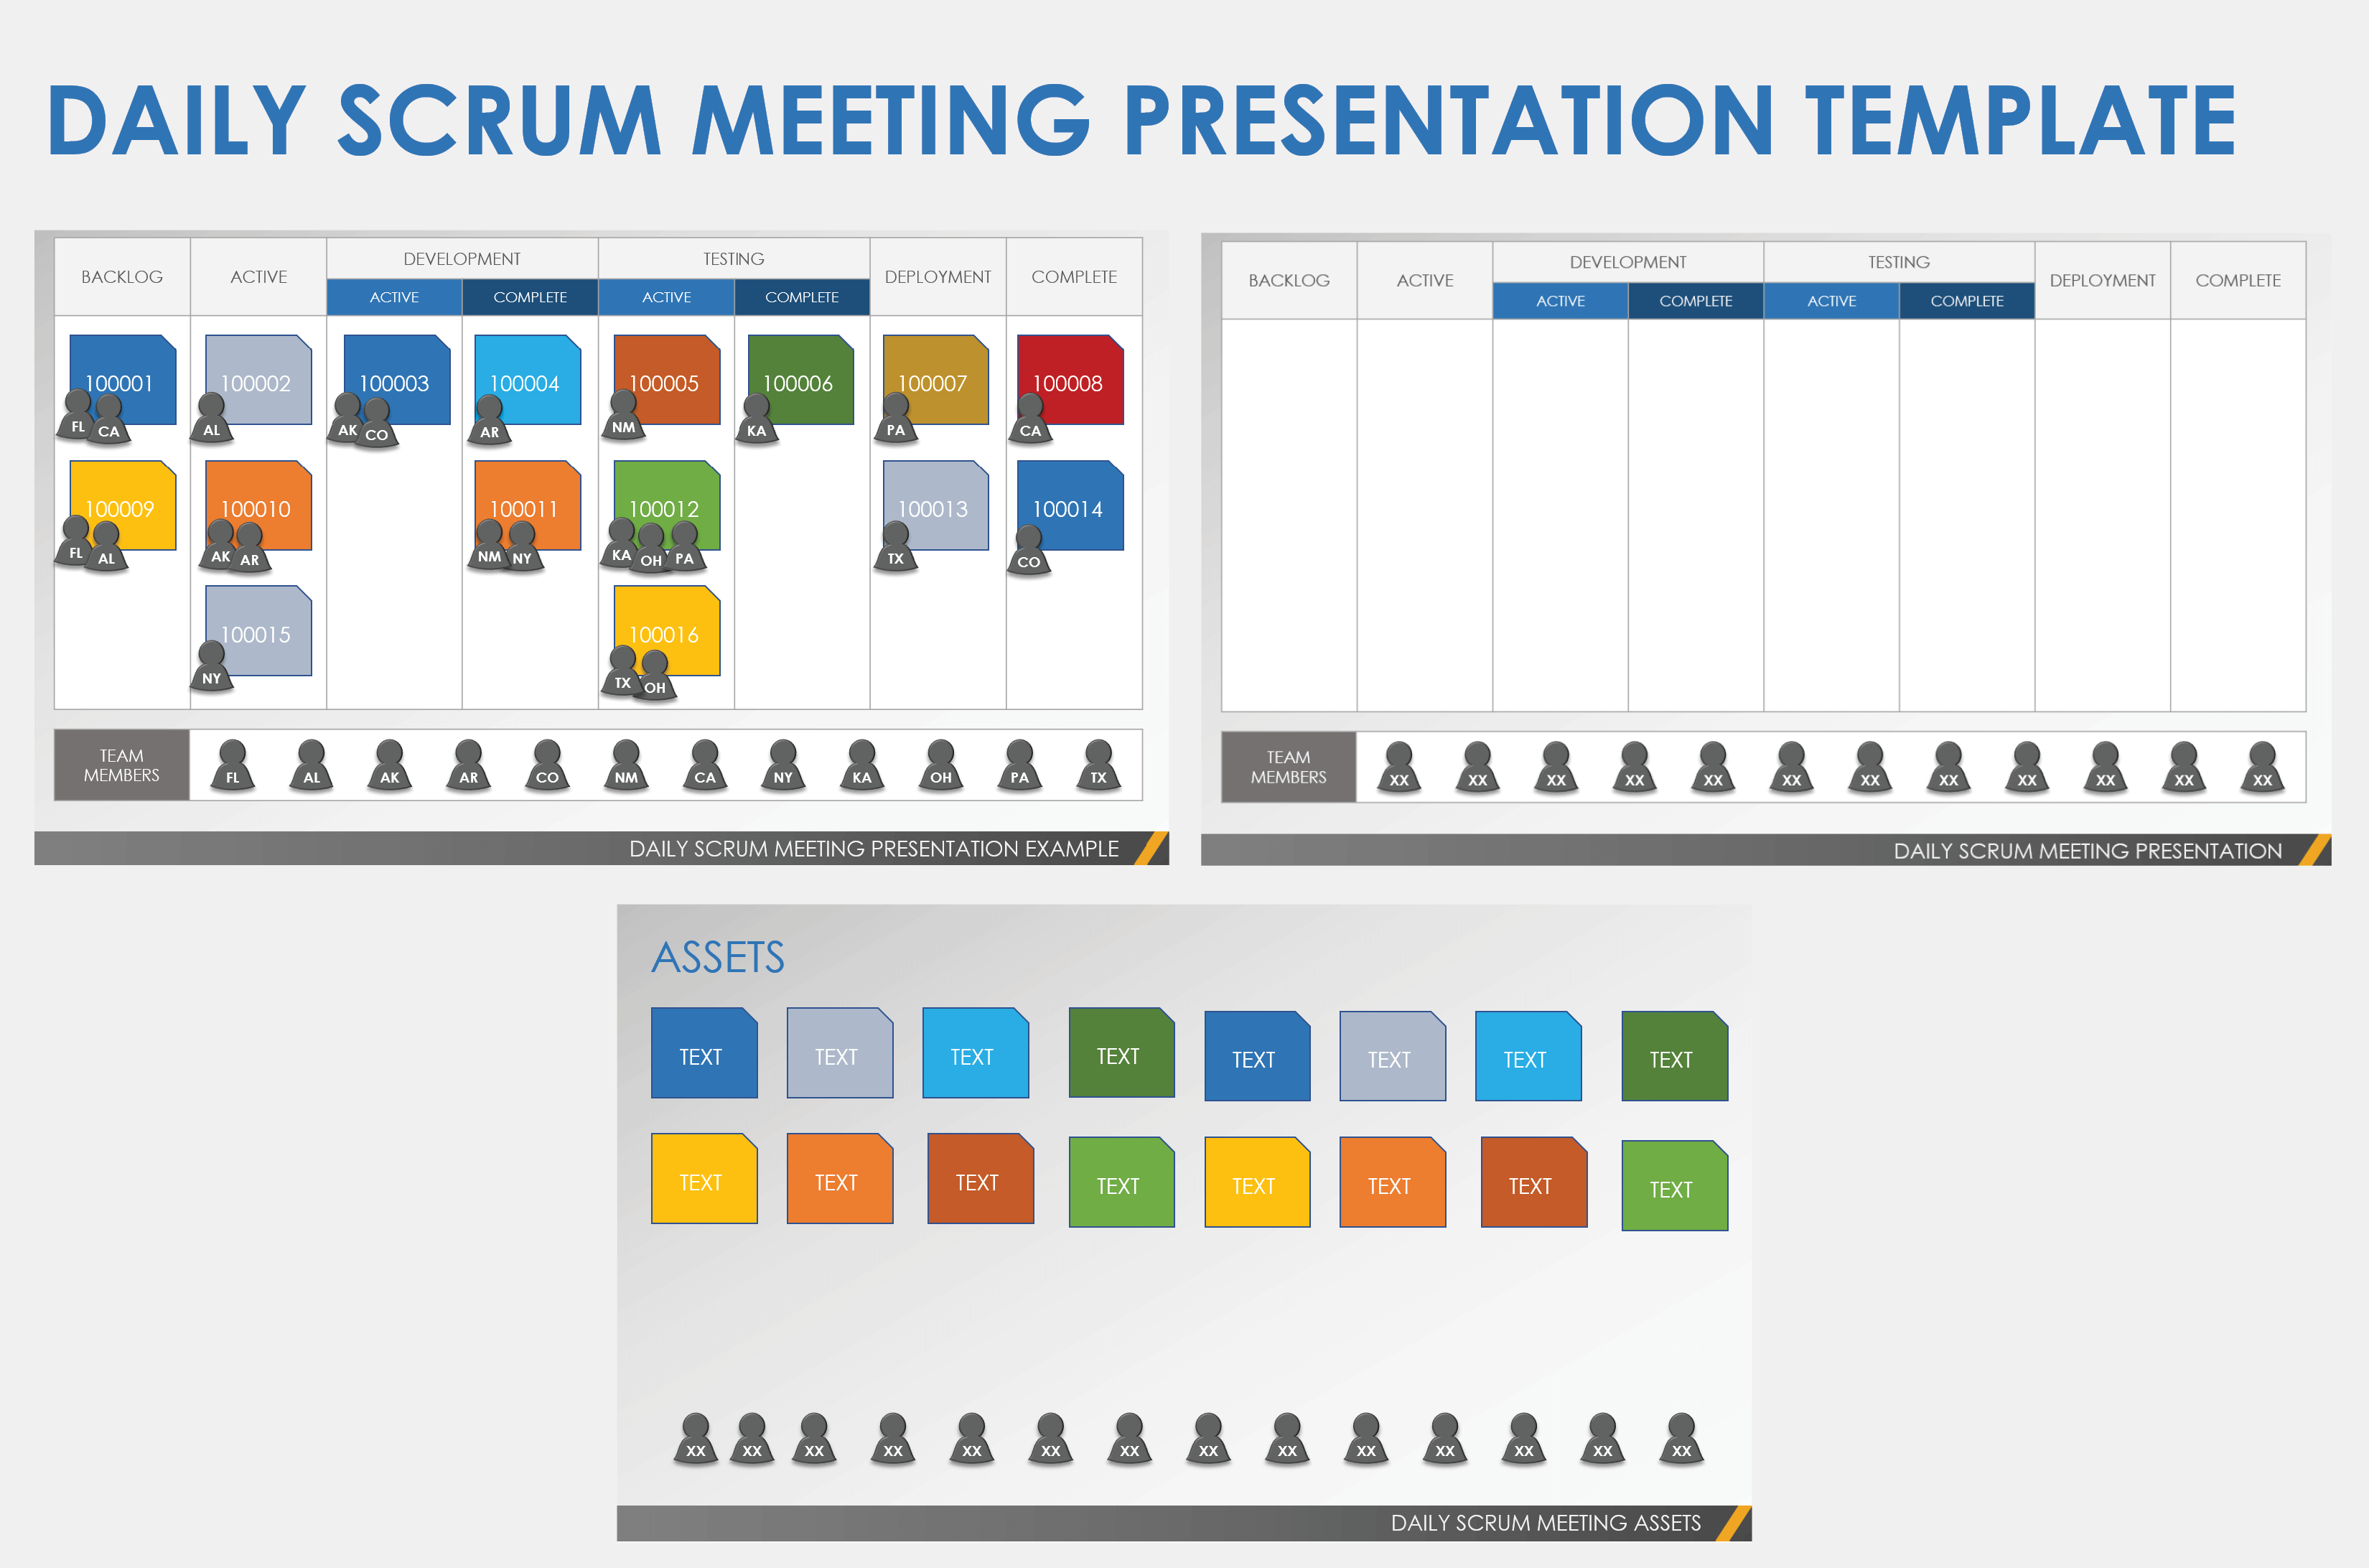 Daily Scrum Meeting Presentation Template